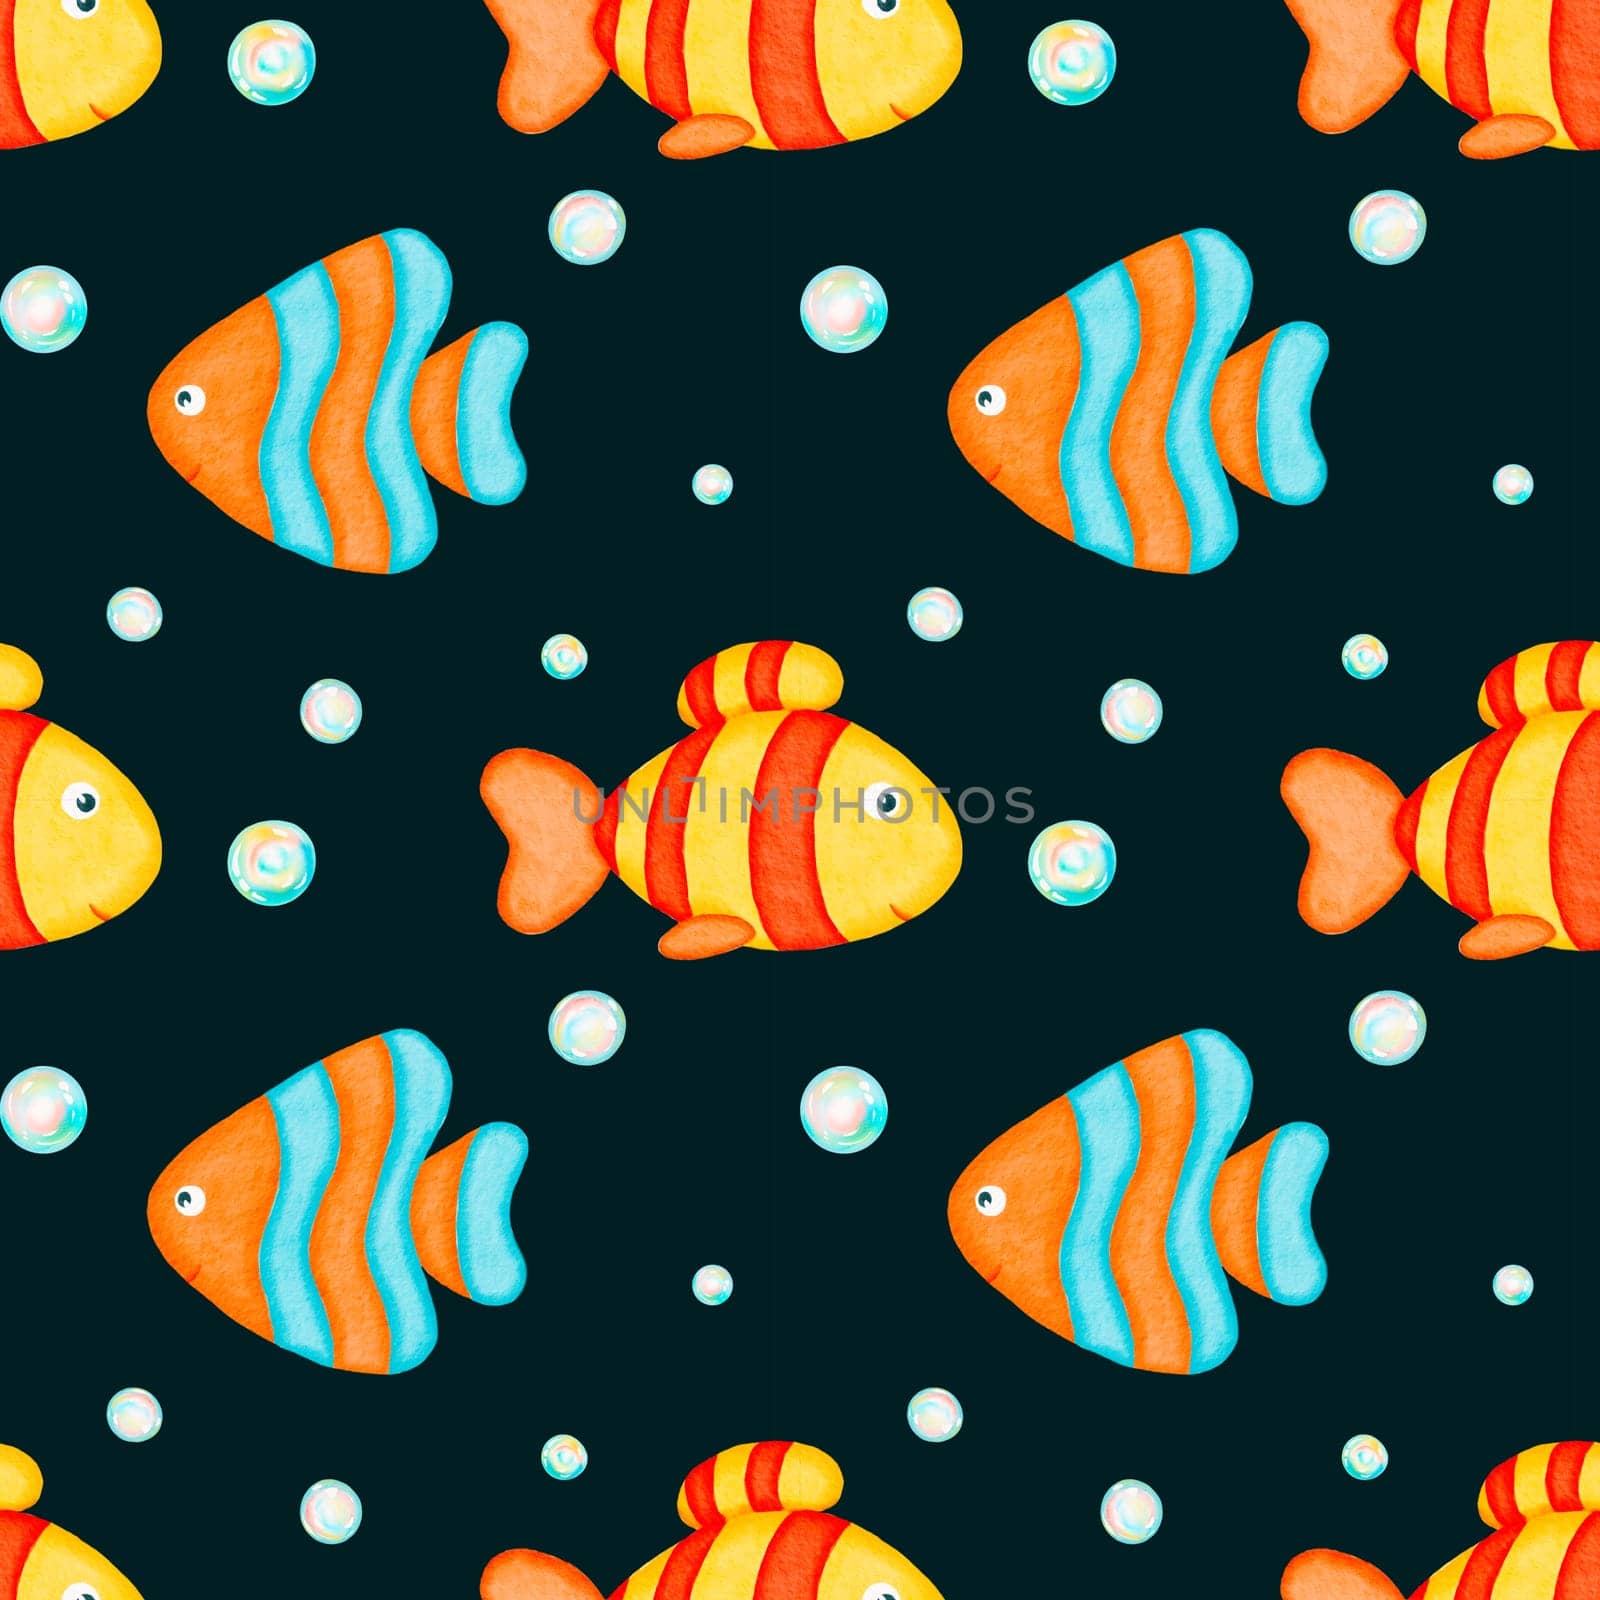 Watercolor seamless pattern. colorful fish and colorful soap bubbles pattern. Toys. Bath toys background. Design for kids, children, textile, fabric, home decor. Painted ornament.